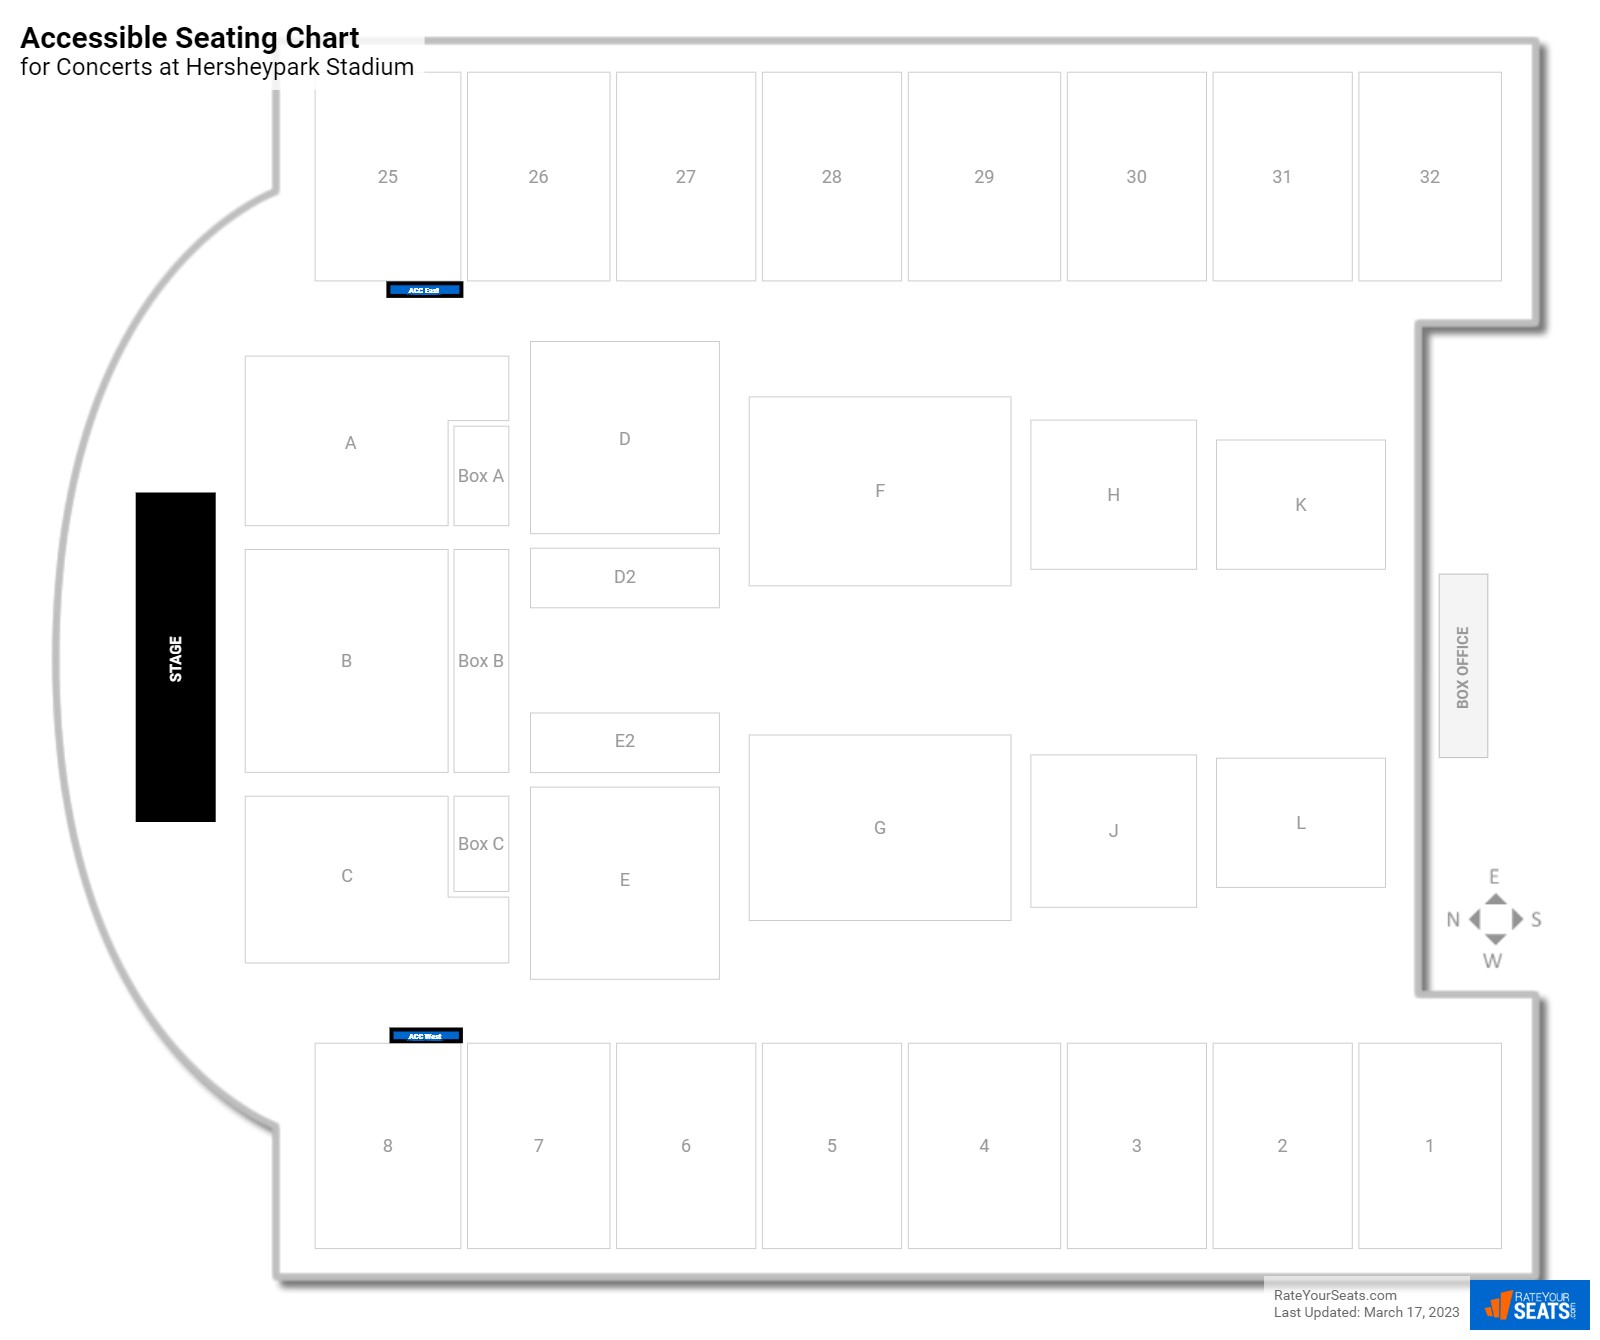 Concert Accessible Seating Chart at Hersheypark Stadium